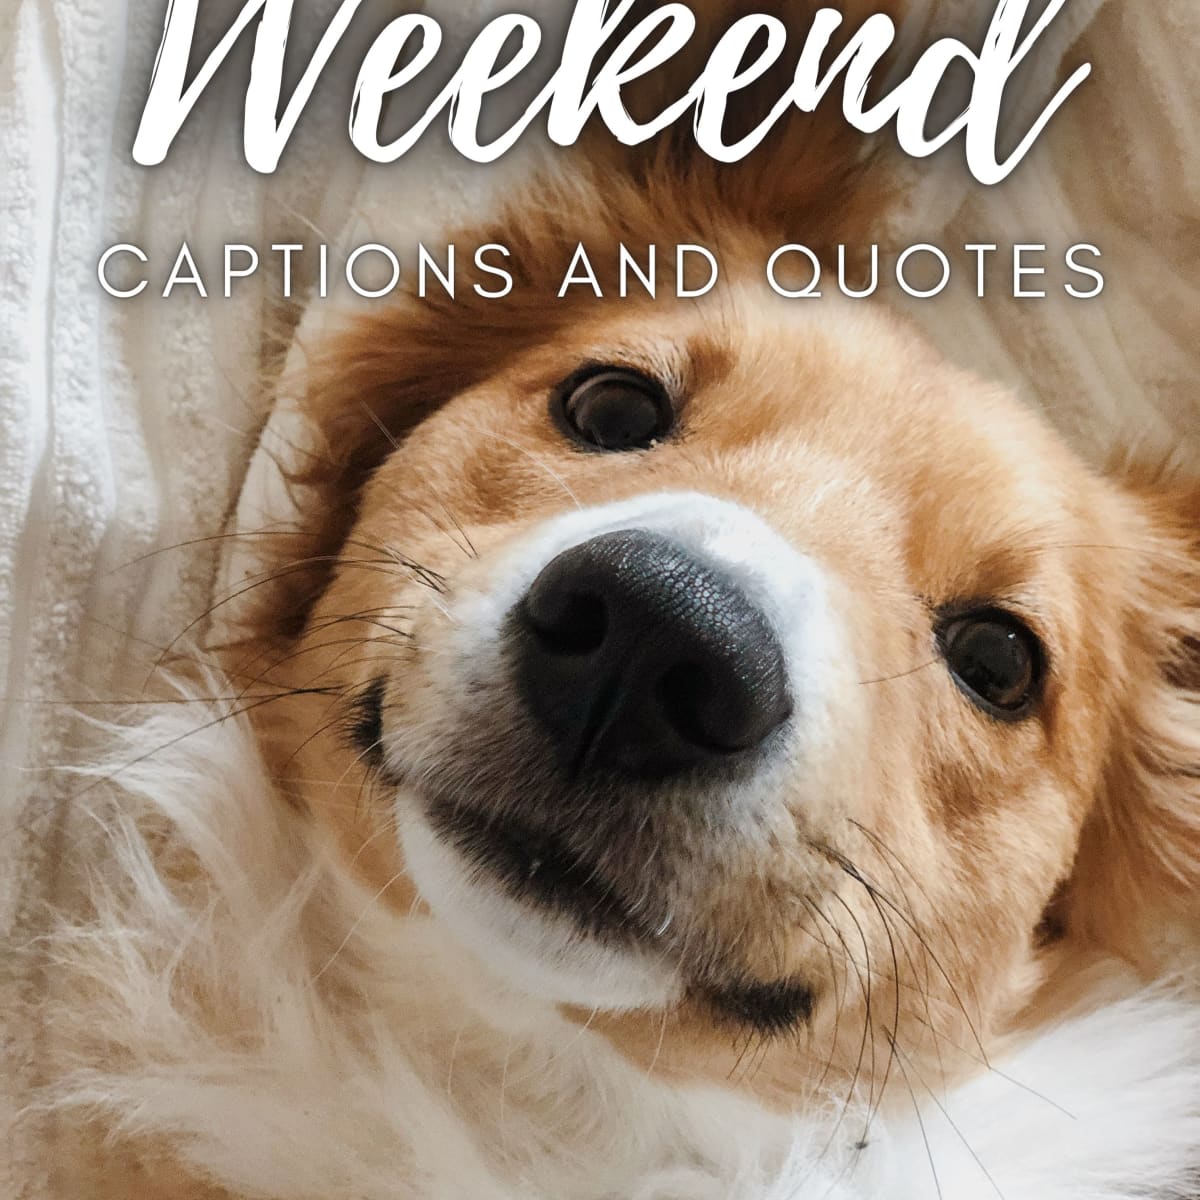 150+ Weekend Quotes and Caption Ideas for Instagram - TurboFuture